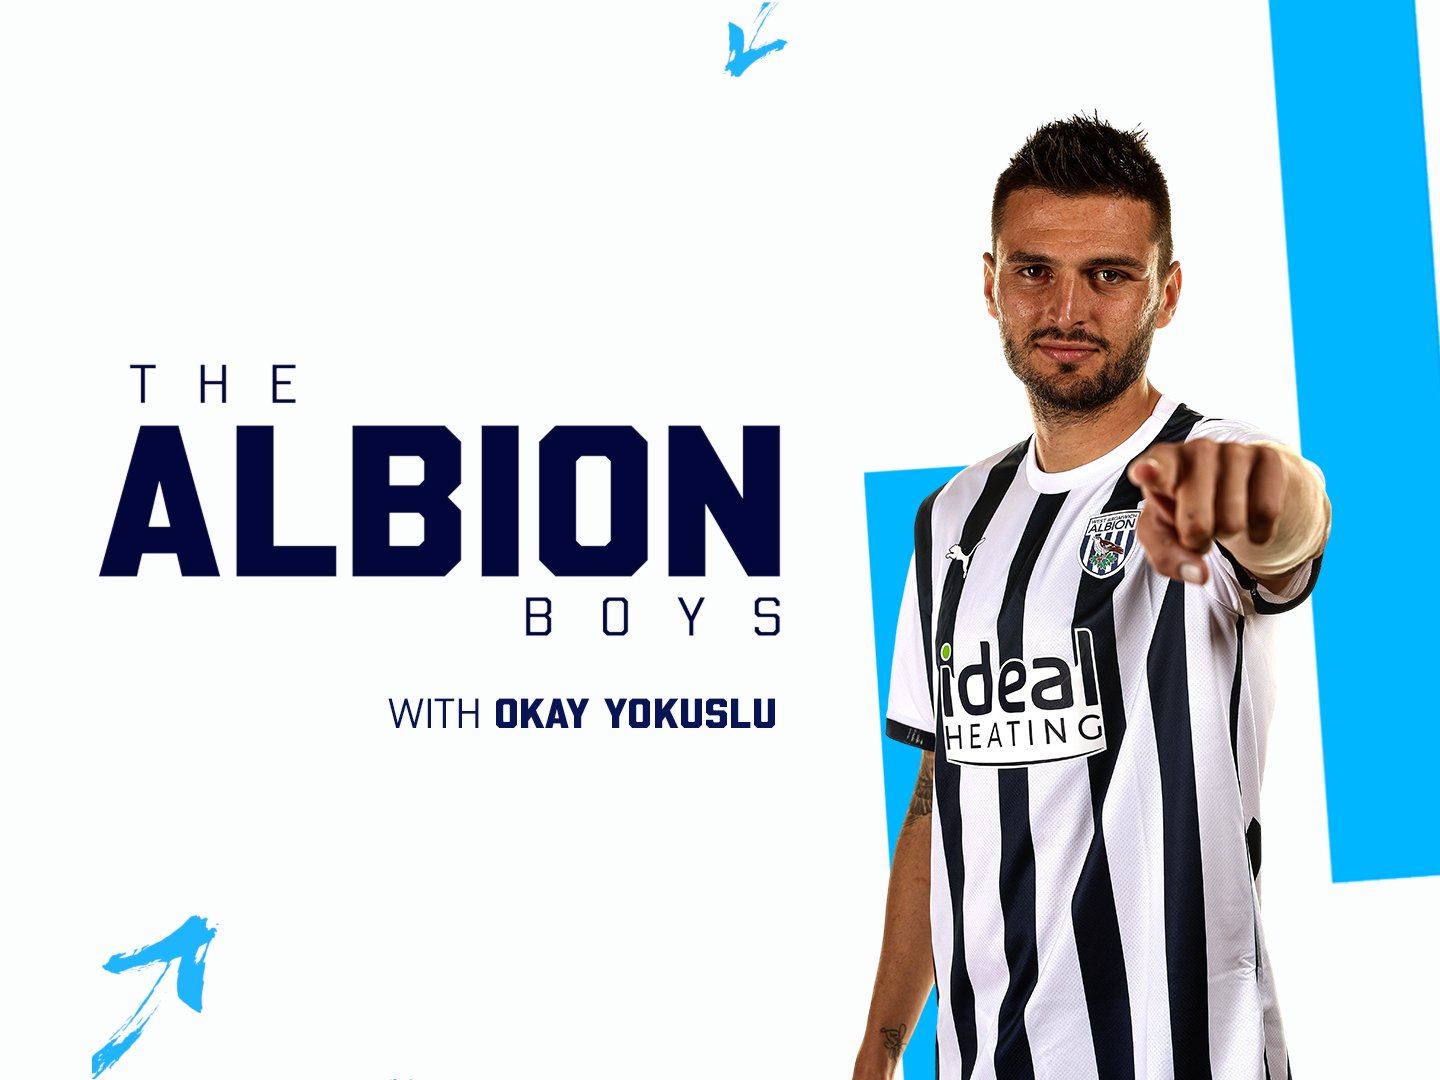 The Albion Boys graphic with an image of Okay Yokuslu in the home shirt